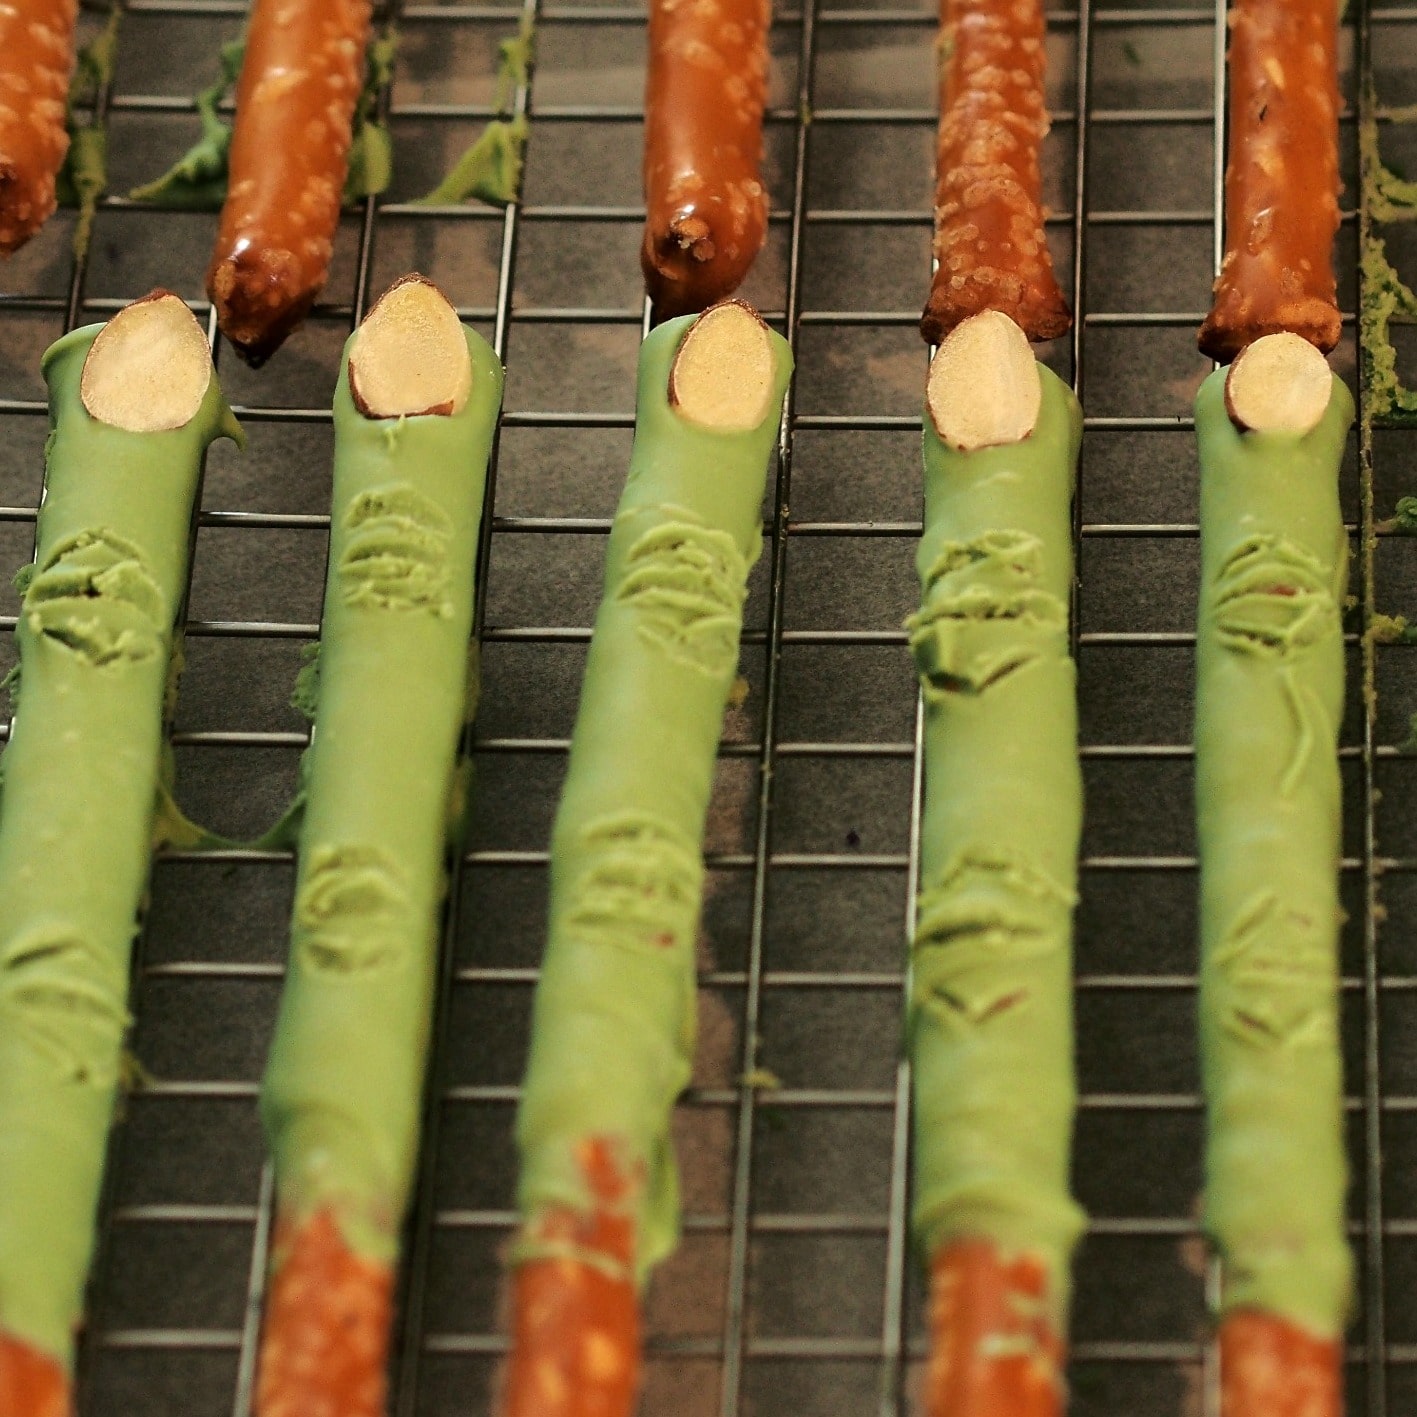 Witch Finger Pretzels - no Halloween party is complete without these fun and easy treats. simplysated.com